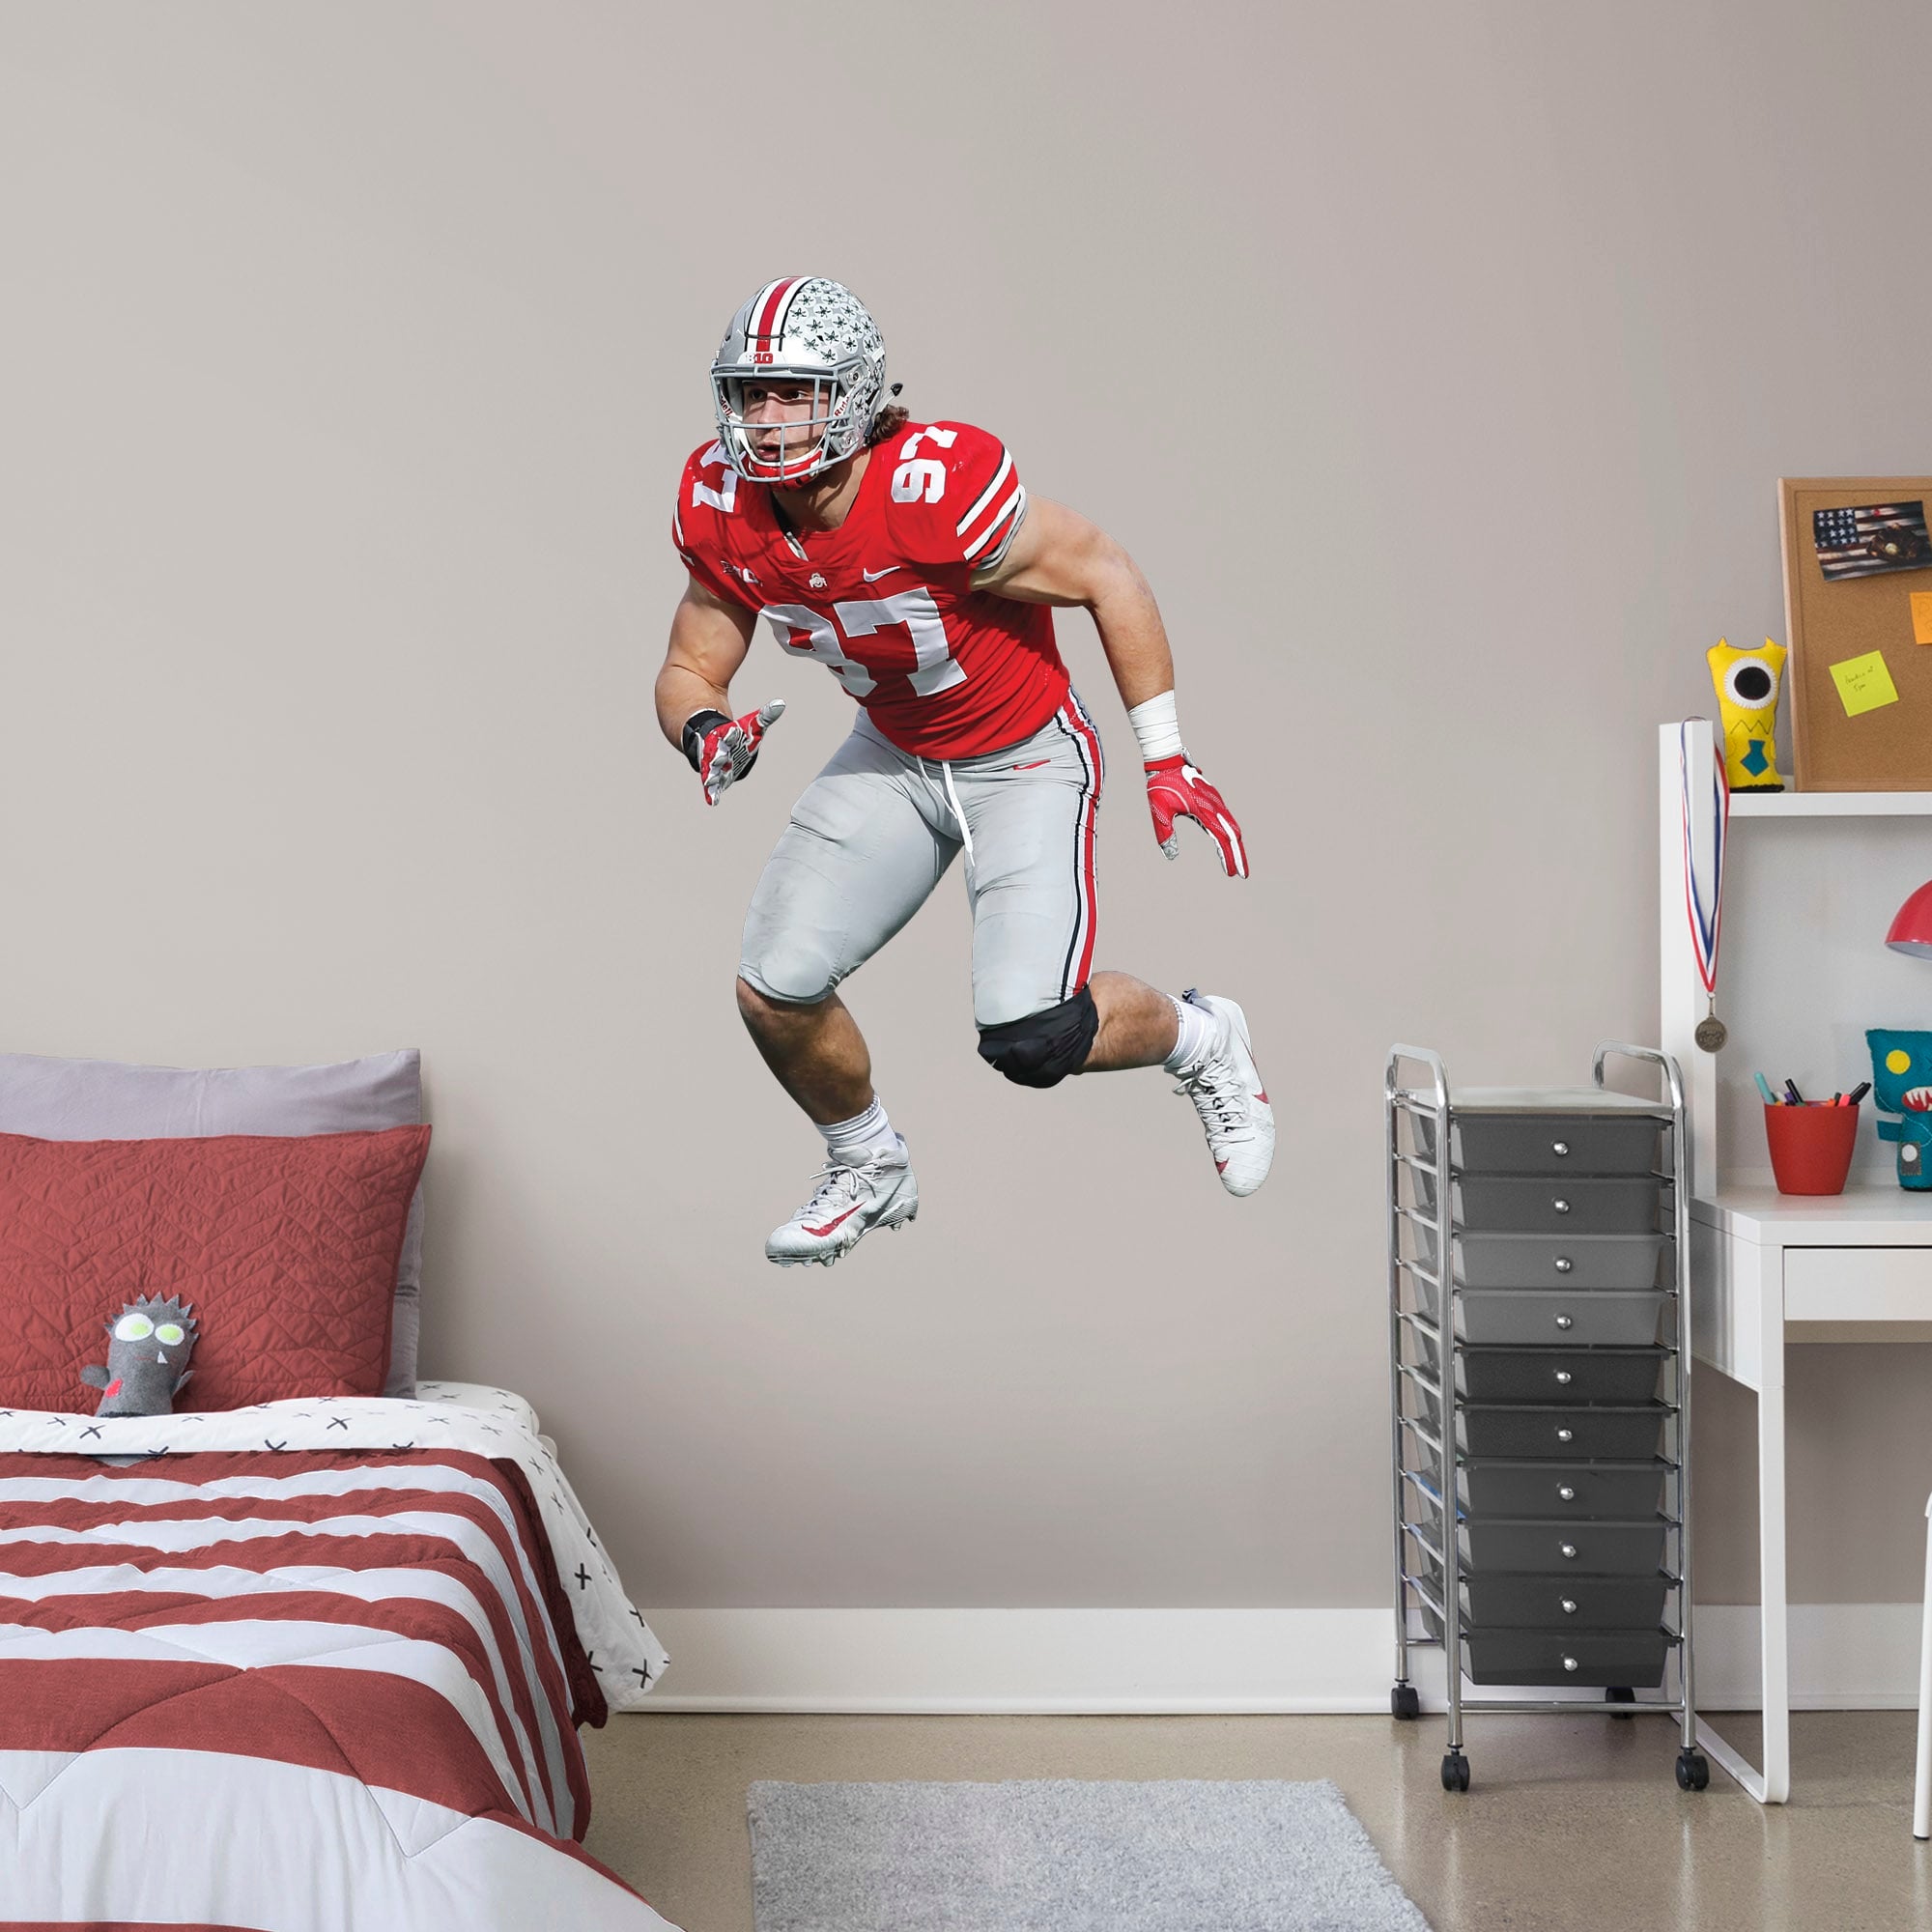 Nick Bosa for Ohio State Buckeyes: Ohio State - Officially Licensed Removable Wall Decal Giant Athlete + 2 Decals (32"W x 51"H)